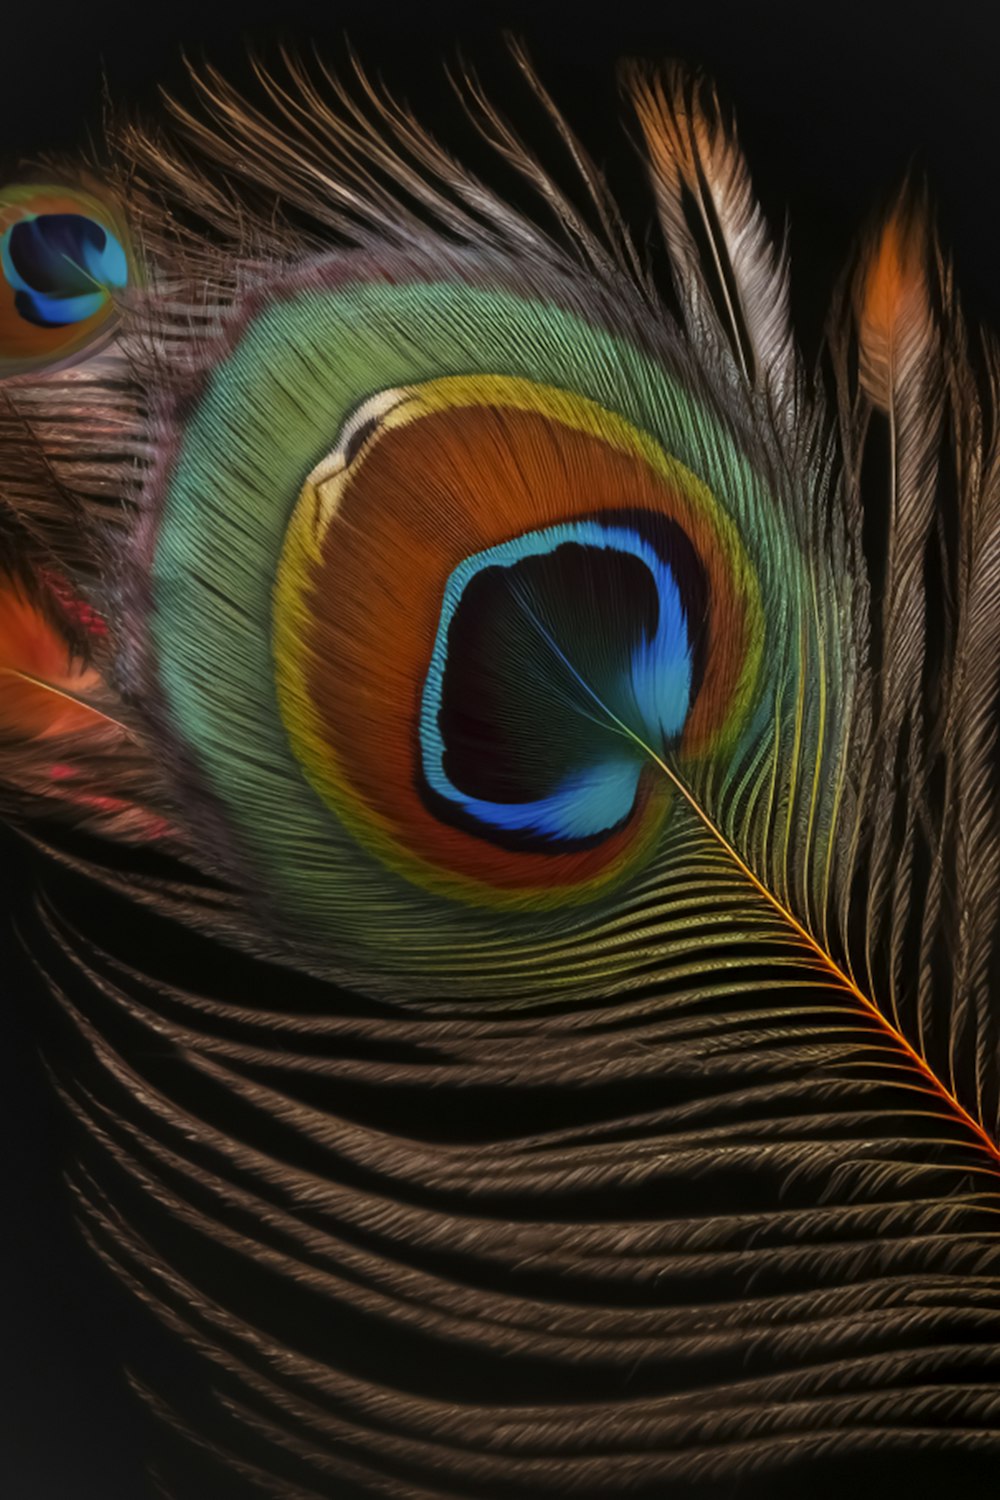 a close up of a peacock feather on a black background